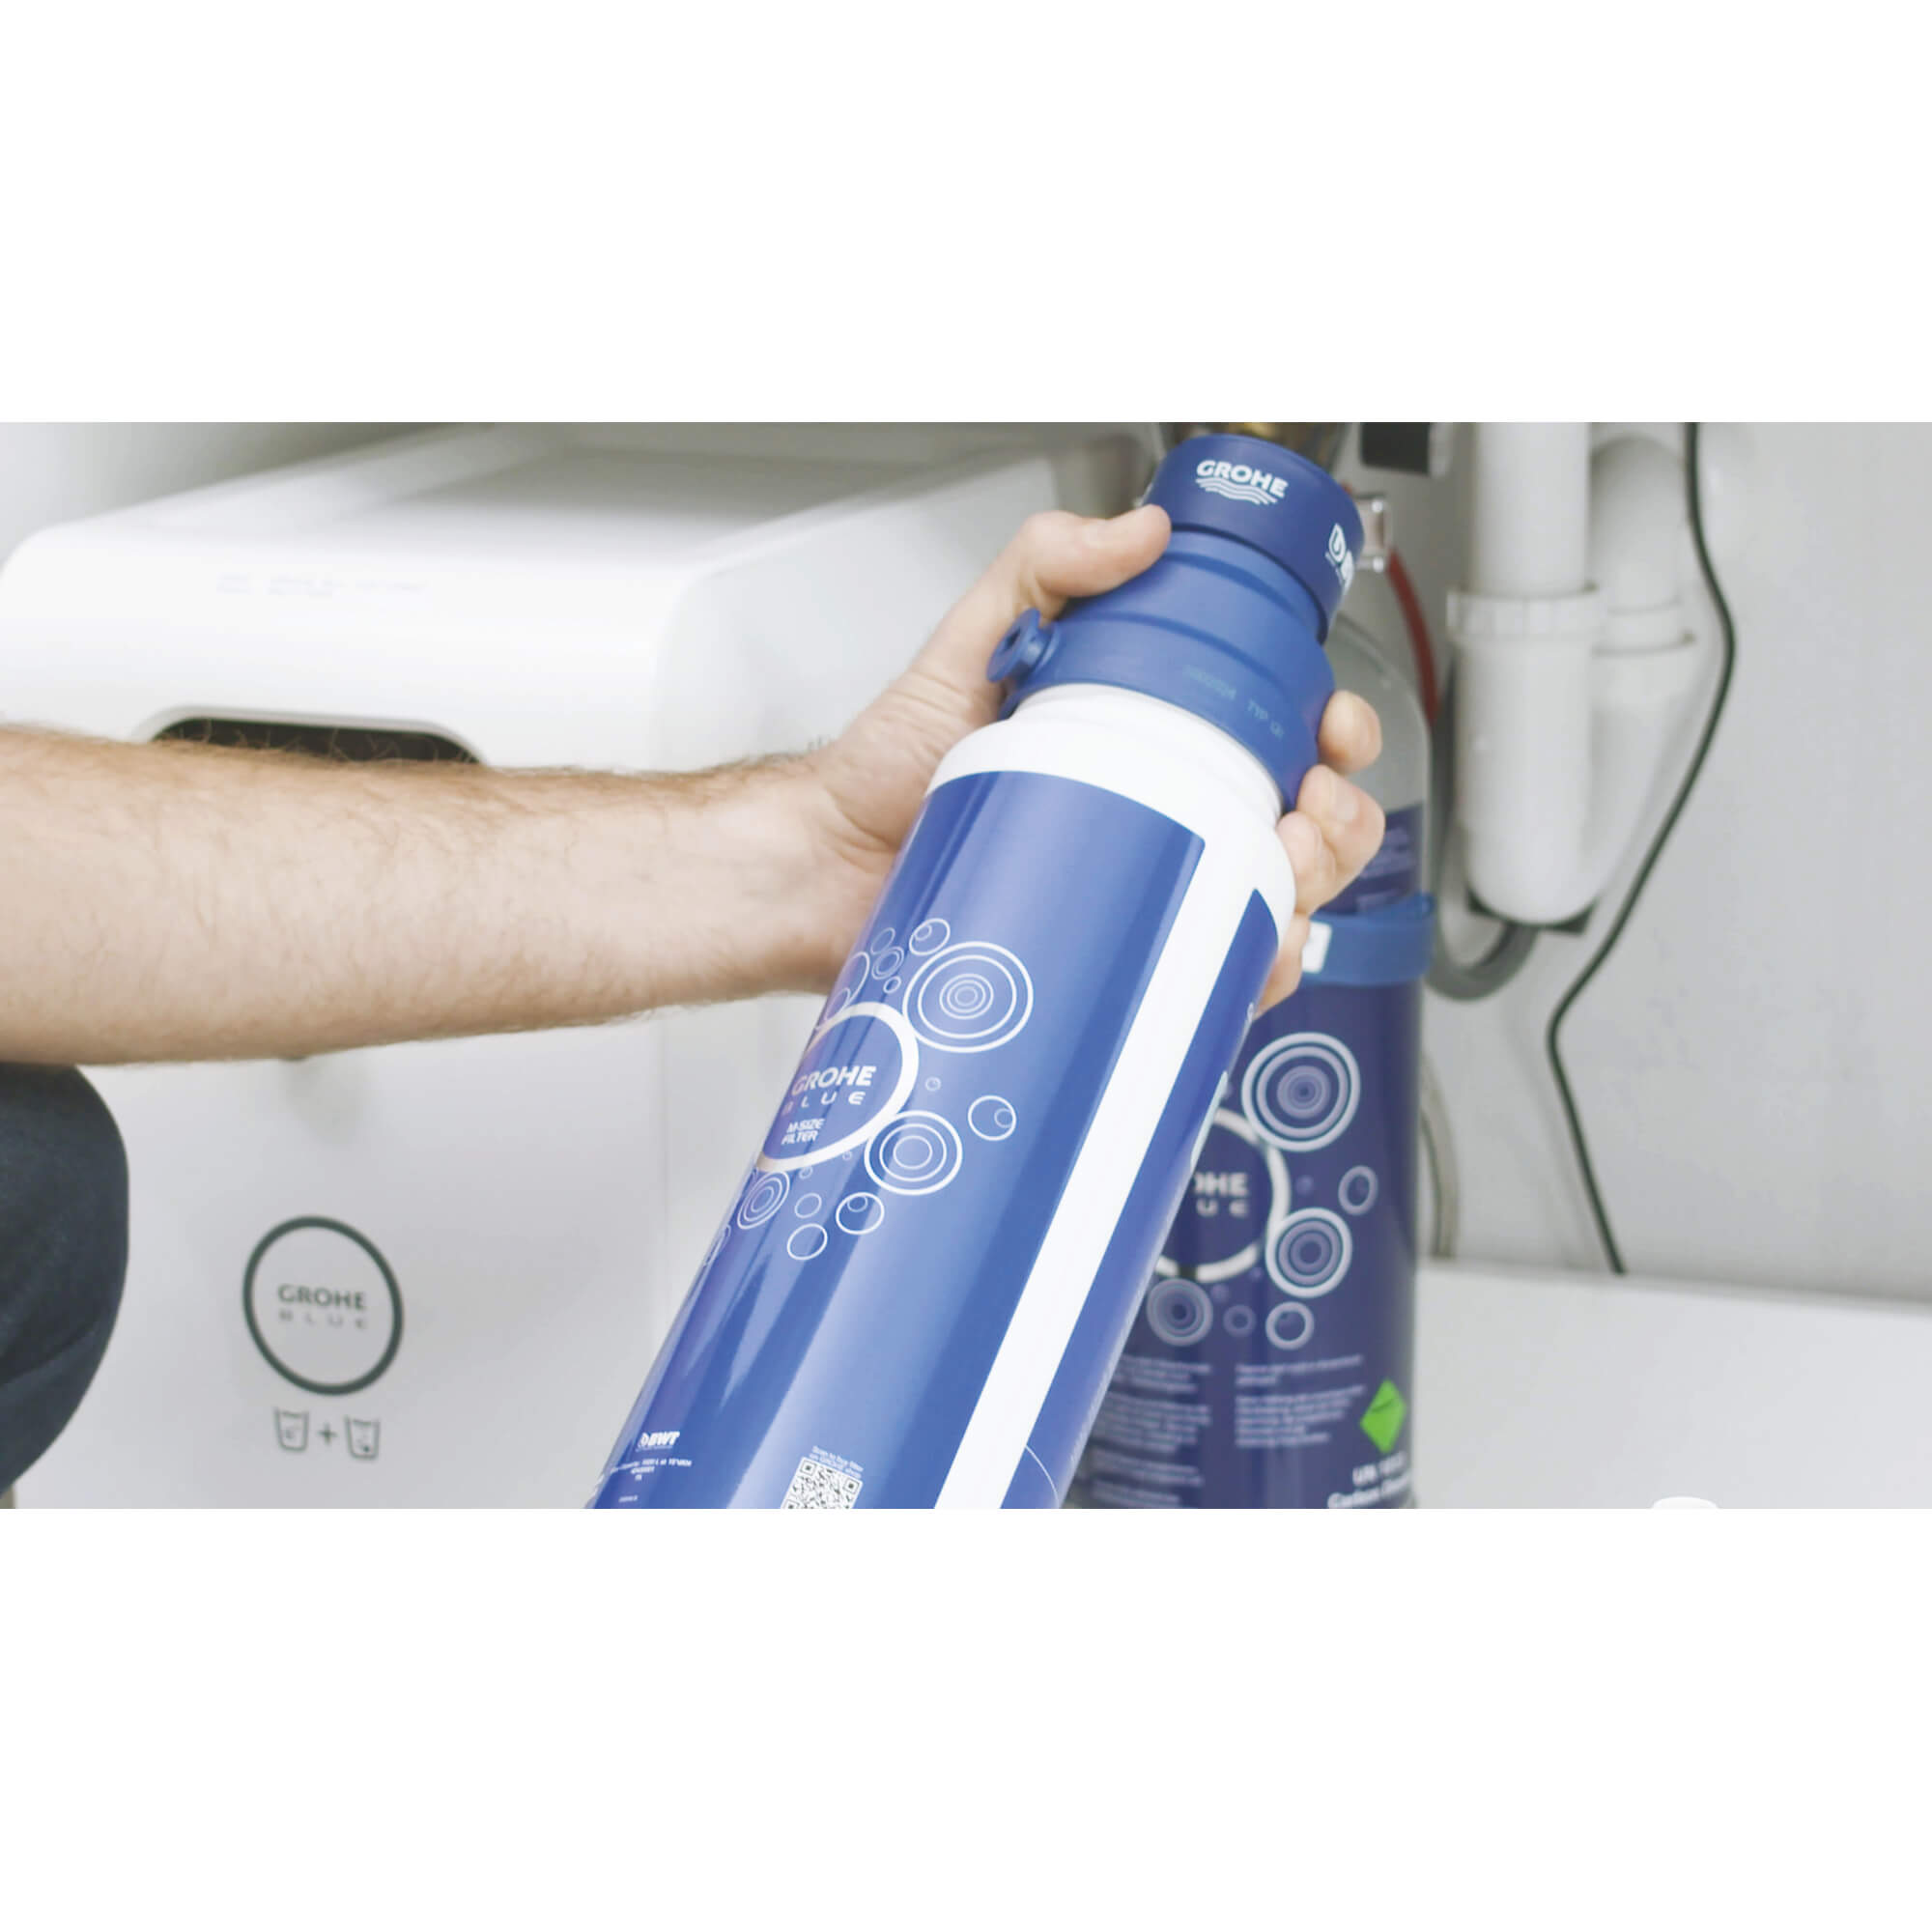 GROHE Blue Magnesium Filter GROHE NO FINISH